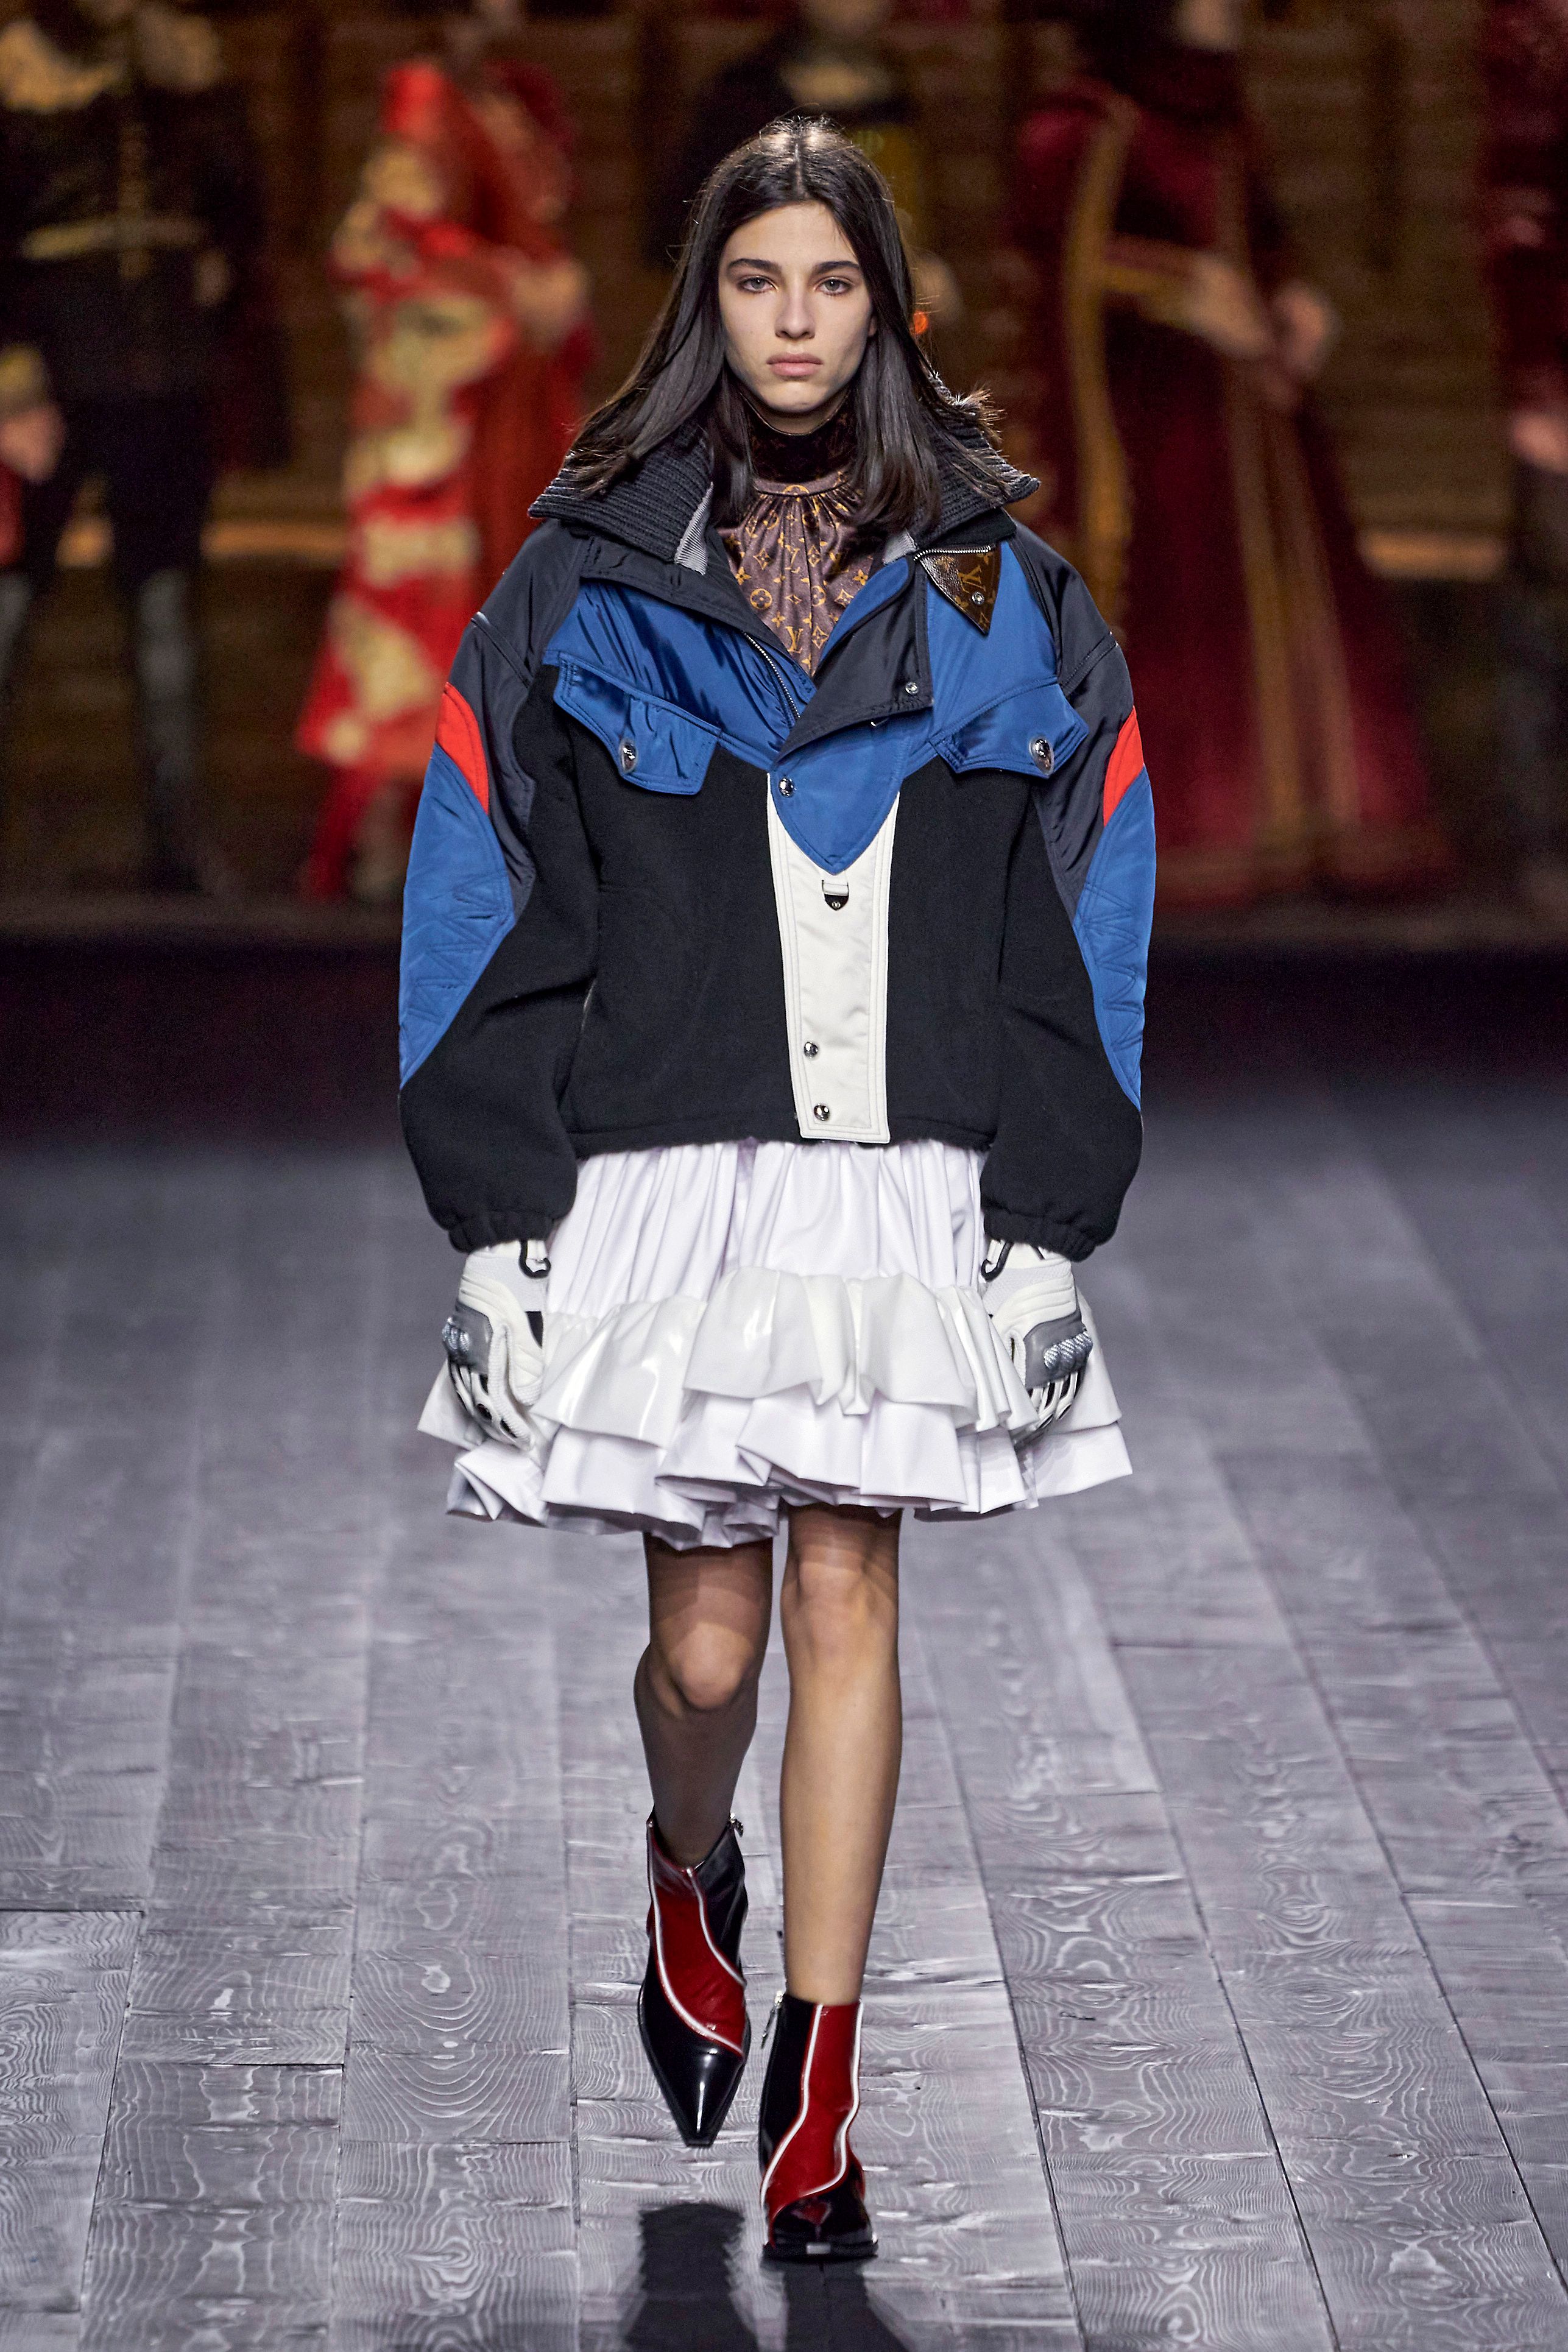 Paris Fashion Week: favorite looks from the latest shows —